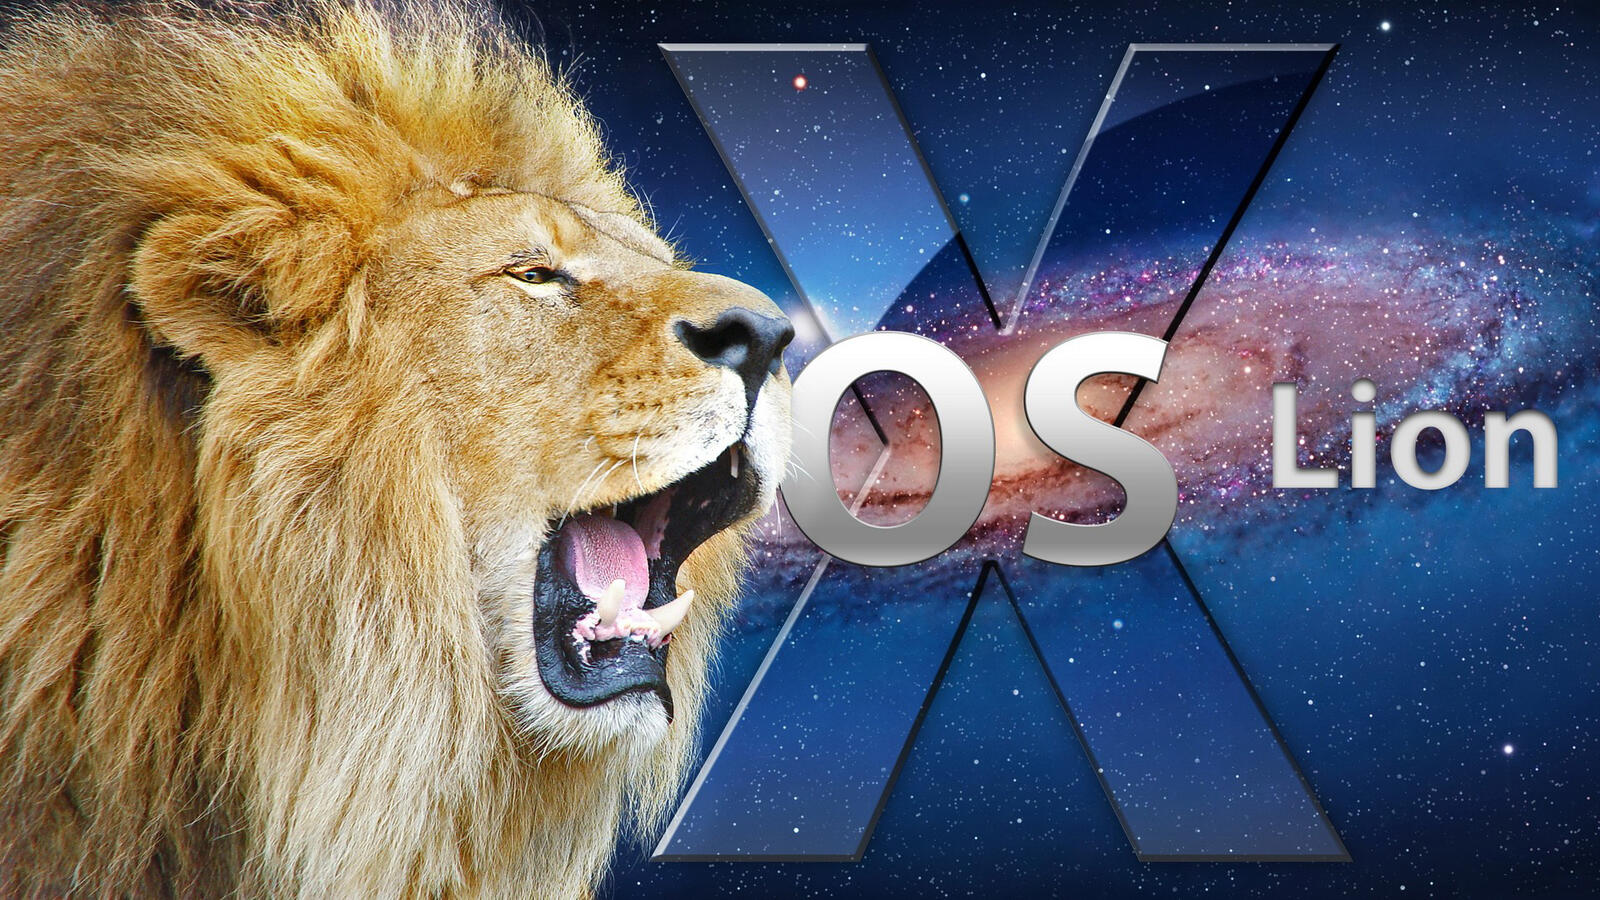 Wallpapers max os lion background on the desktop